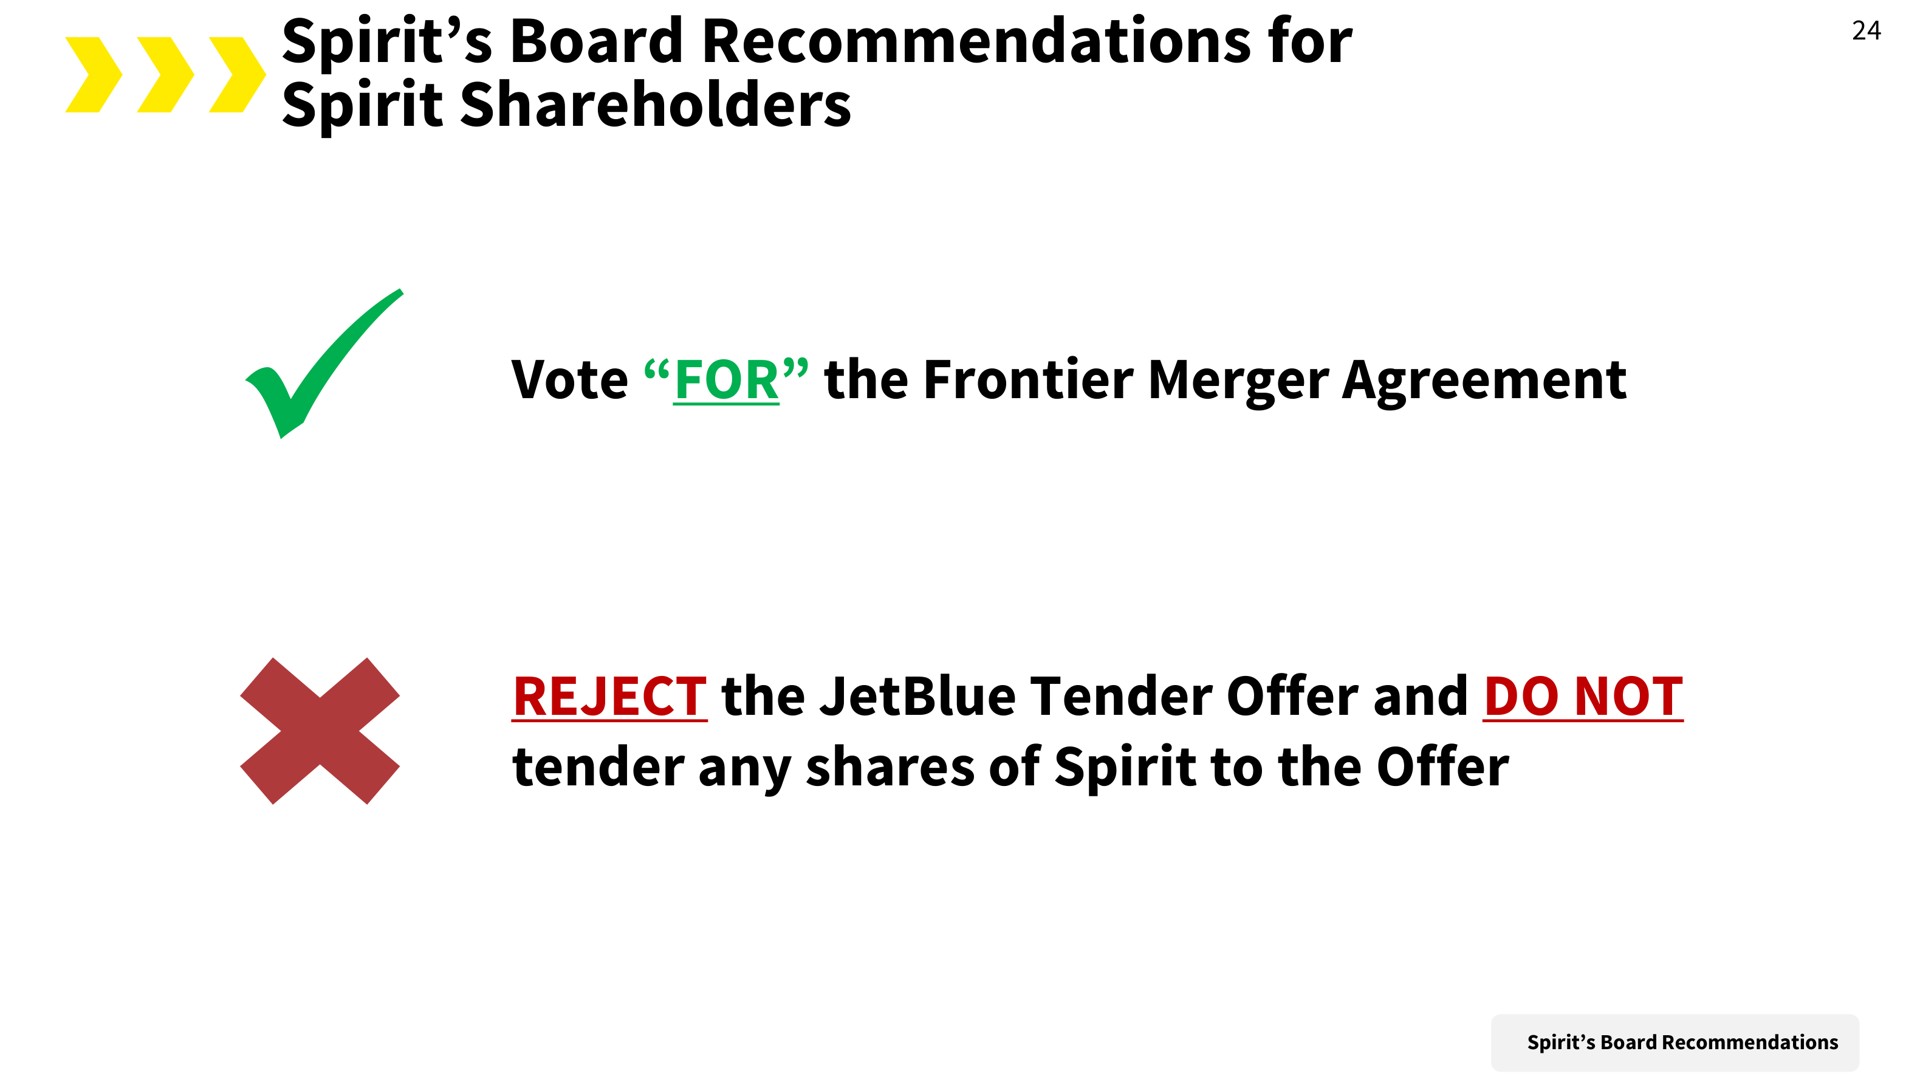 spirit board recommendations for spirit shareholders vote for the frontier merger agreement reject the tender offer and do not tender any shares of spirit to the offer | Spirit